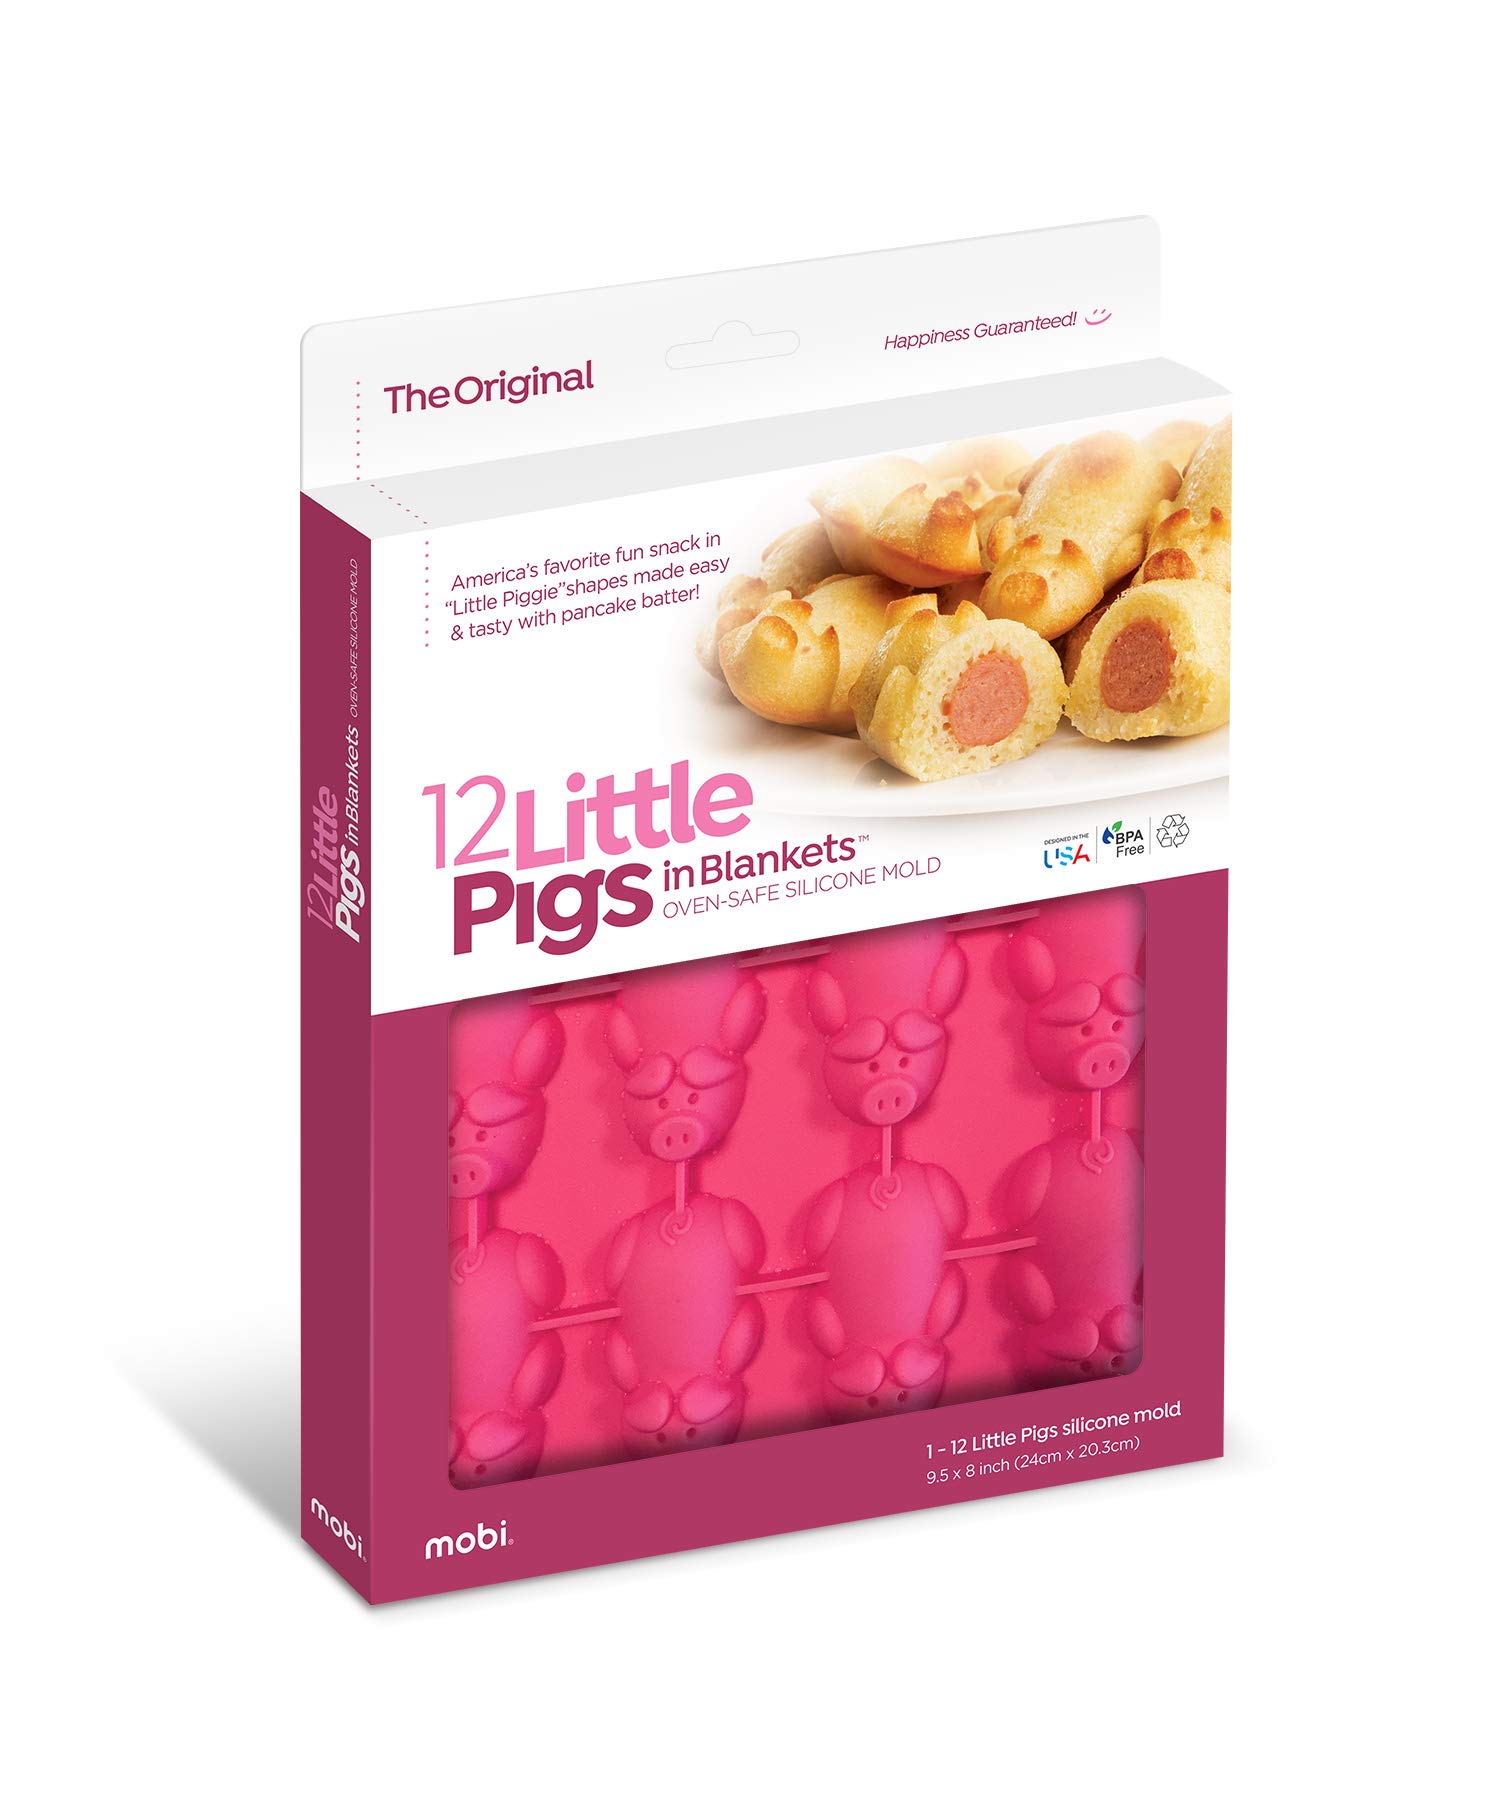 “The Original” - Pigs - “Pigs in a blanket” snack with a twist